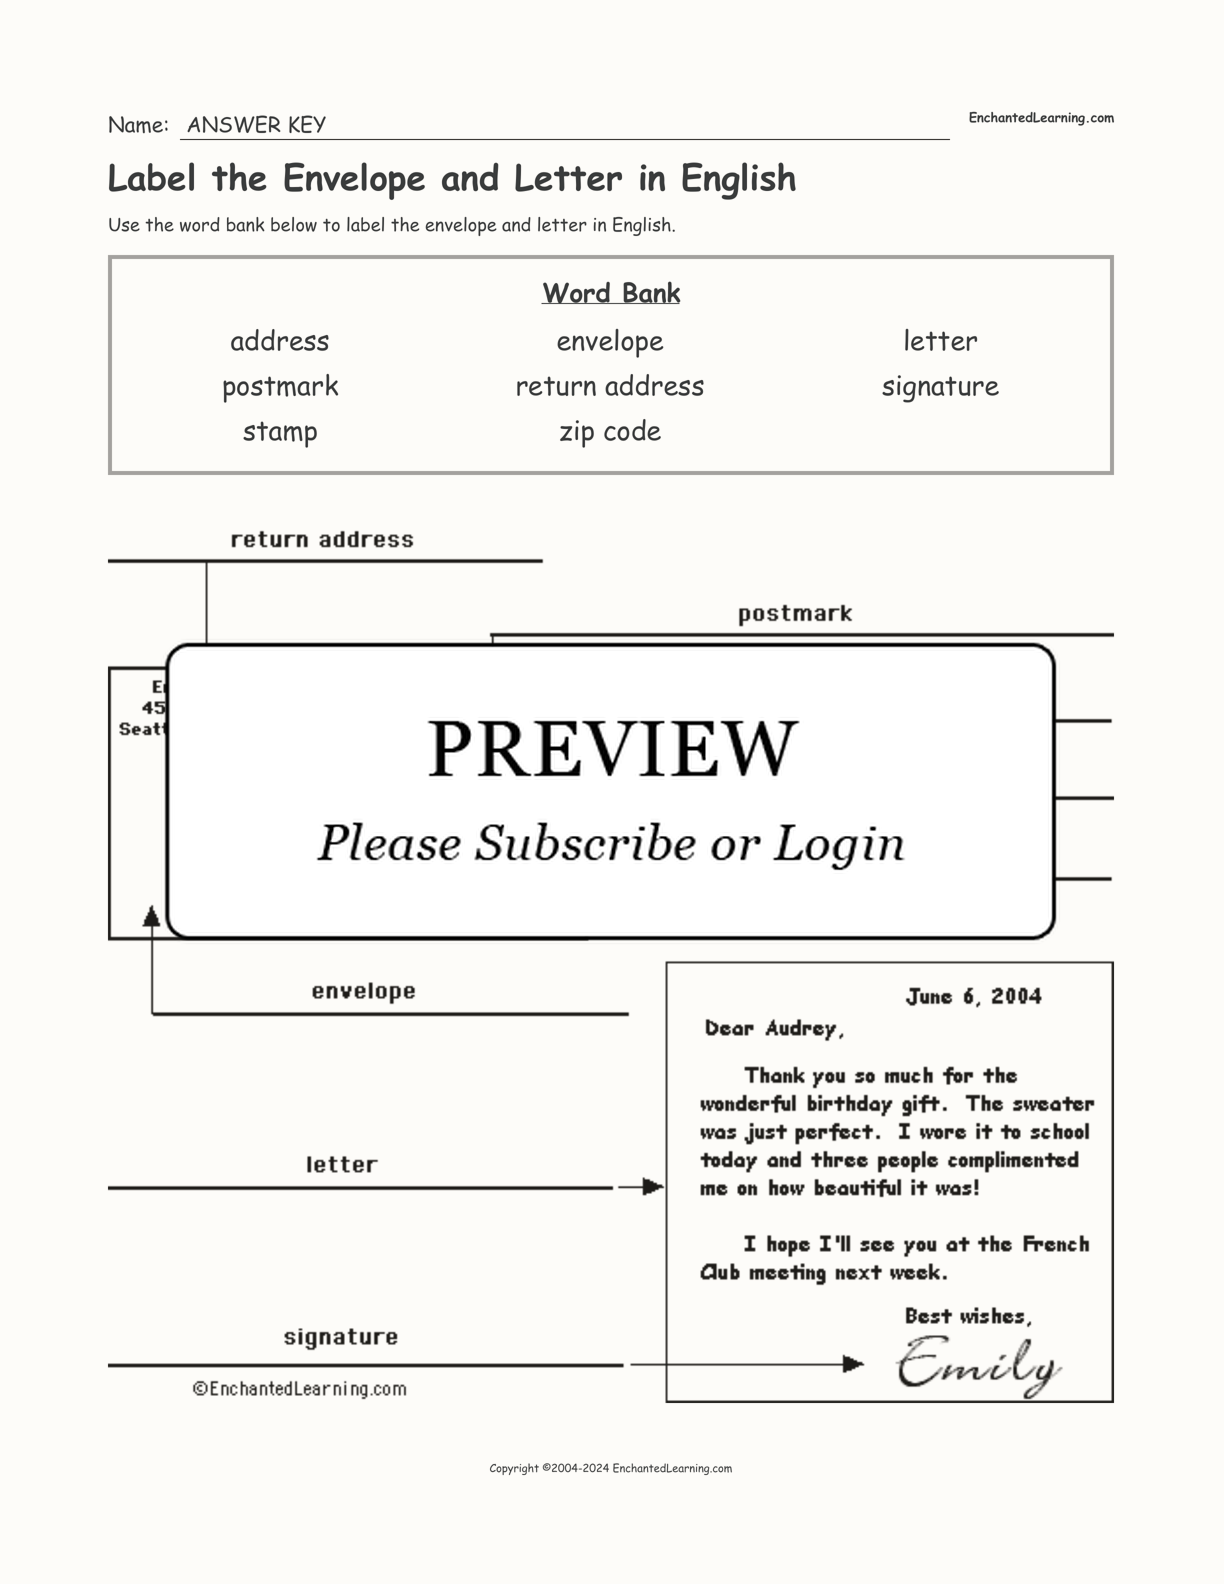 Label the Envelope and Letter in English interactive worksheet page 2